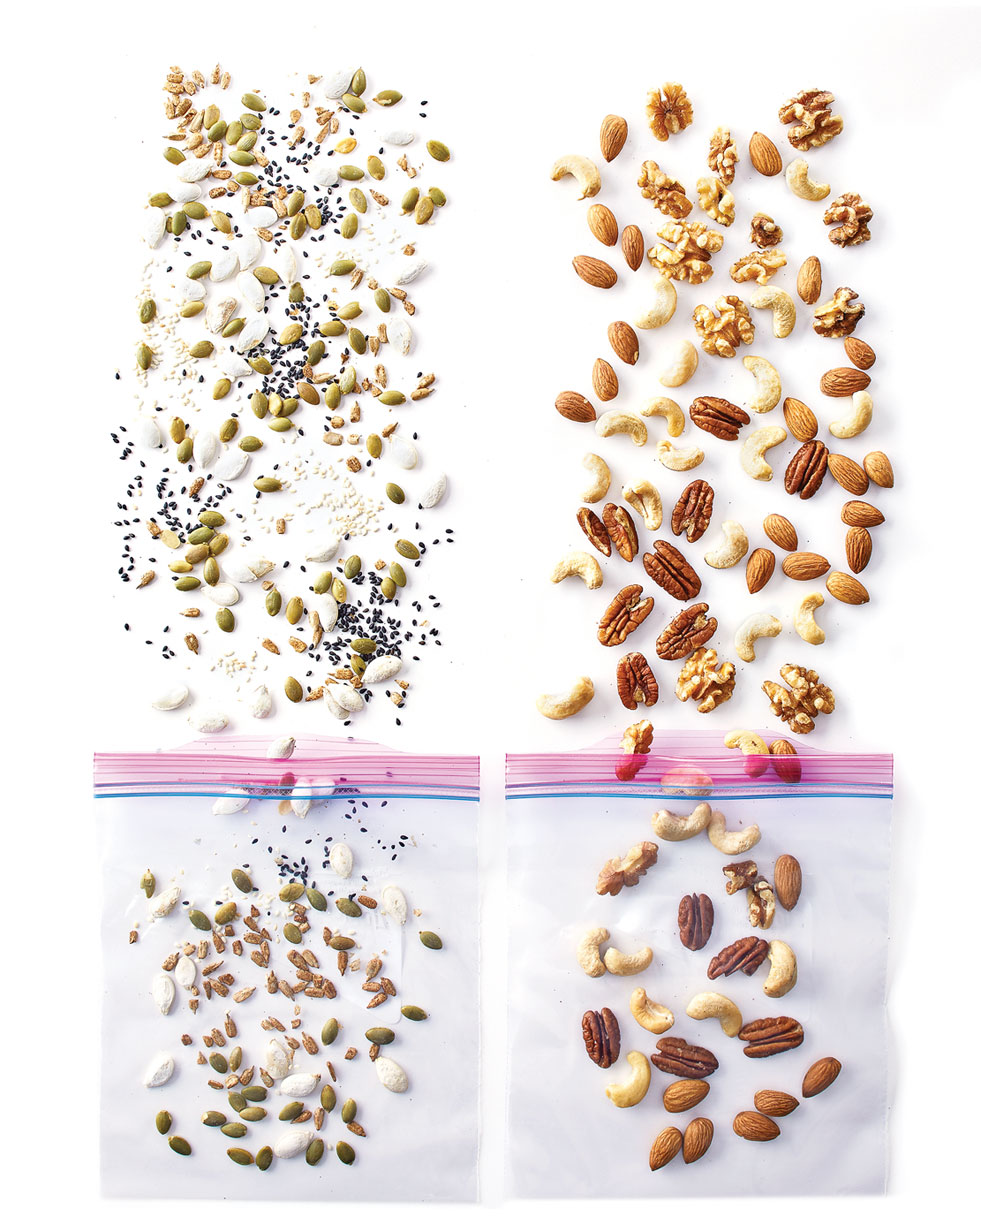 How to store nuts and seeds 